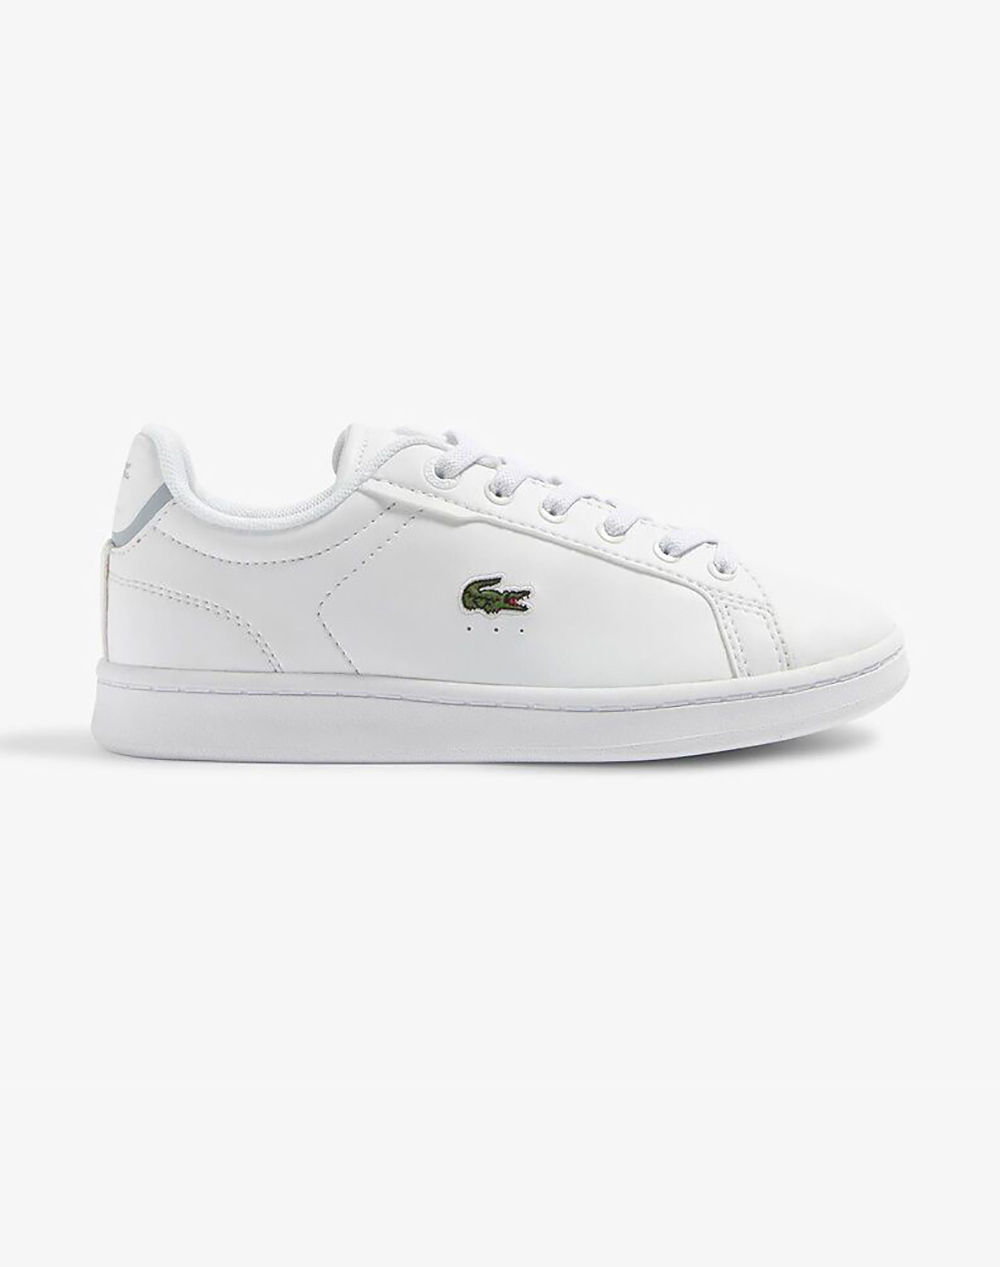 LACOSTE ΠΑΠΟΥΤΣΙΑ ΠΑΙΔΙΚΑ CARNABY PRO 2233 SUI 37-46SUI000621G-0000 White 3832BLACO6040069_5344